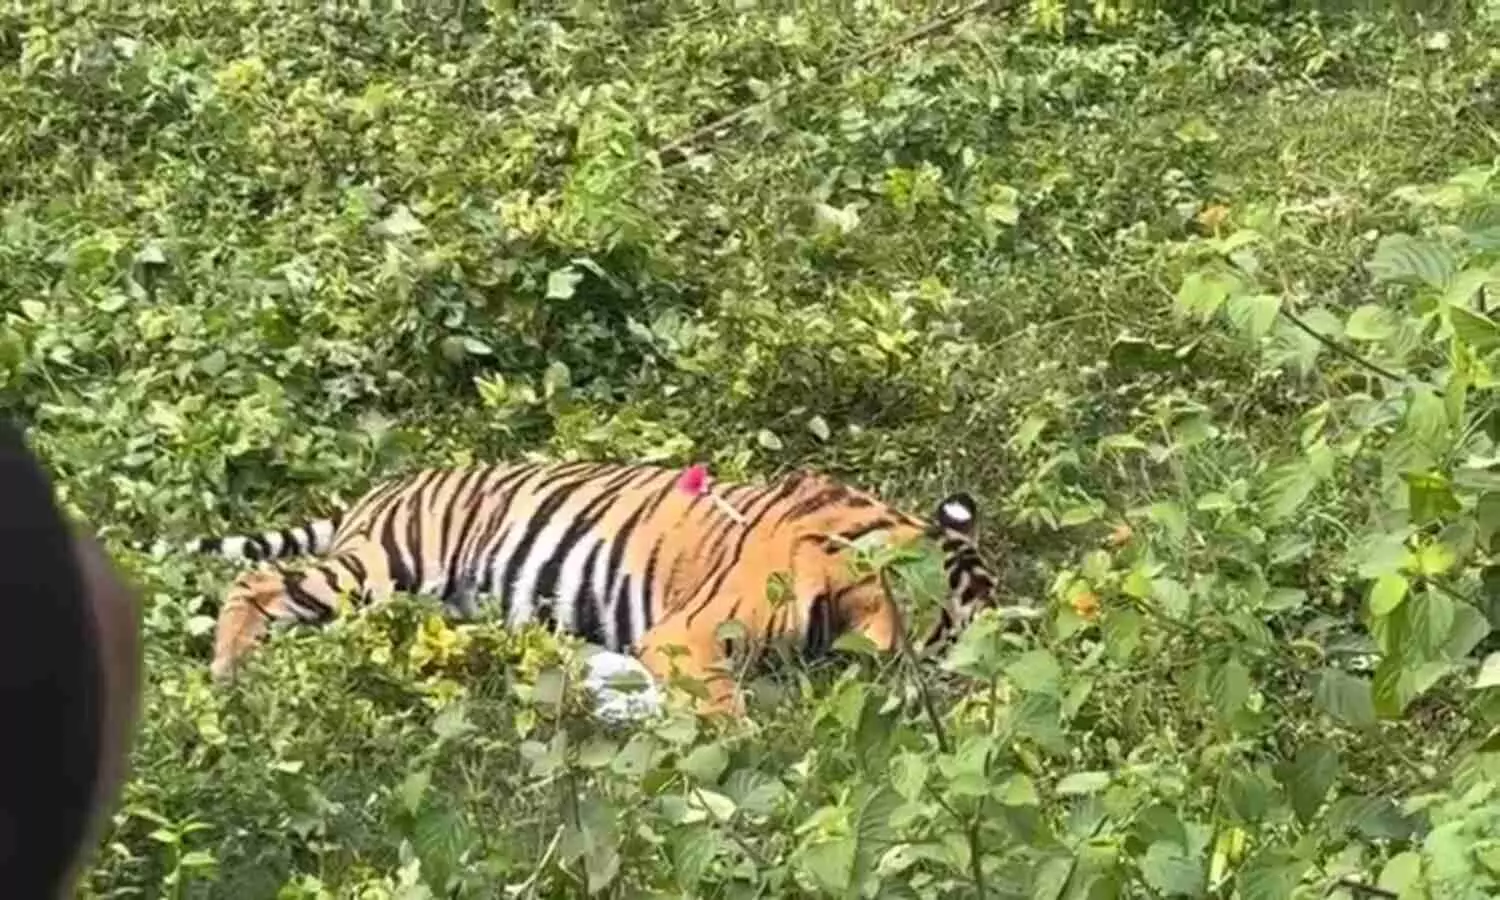 Tigress tranquilized in Pilibhit